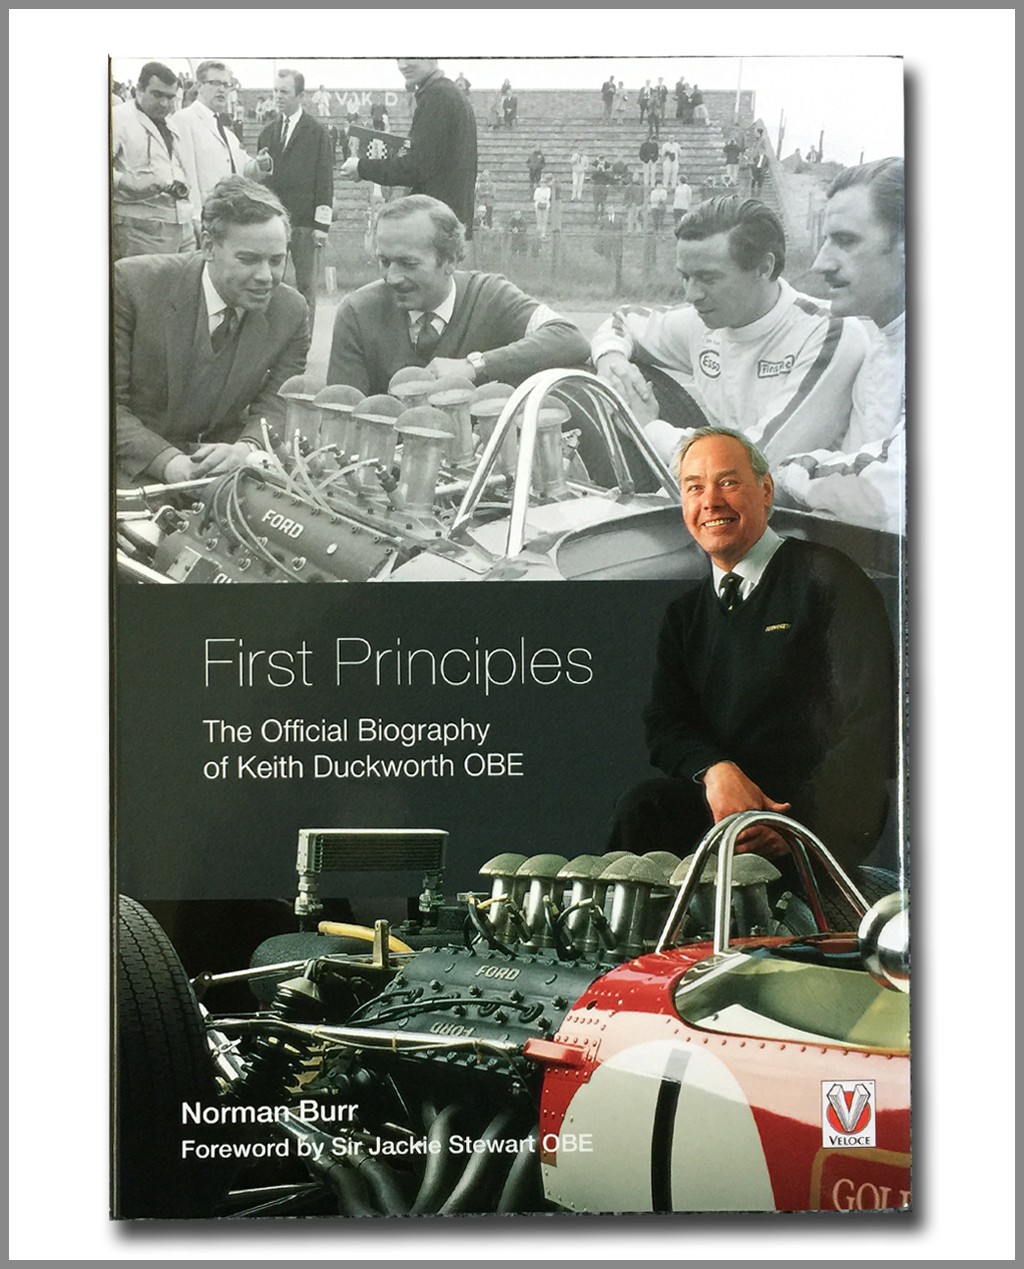 First Principles: The Official Biography of Keith Duckworth by Norman Burr